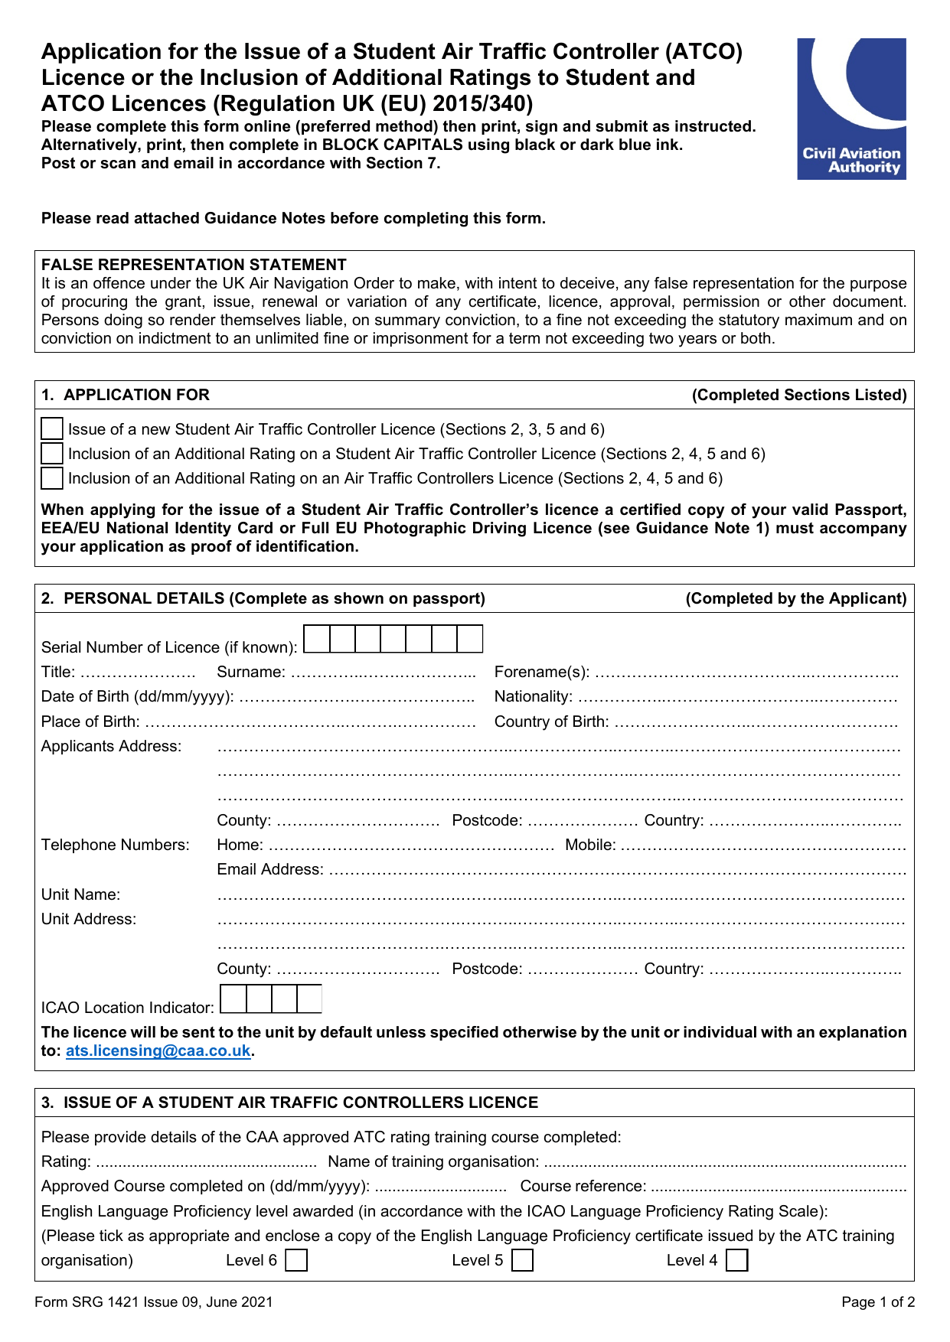 Form SRG1421 Application for the Issue of a Student Air Traffic Controller (Atco) Licence or the Inclusion of Additional Ratings to Student and Atco Licences (Regulation UK (Eu) 2015 / 340) - United Kingdom, Page 1